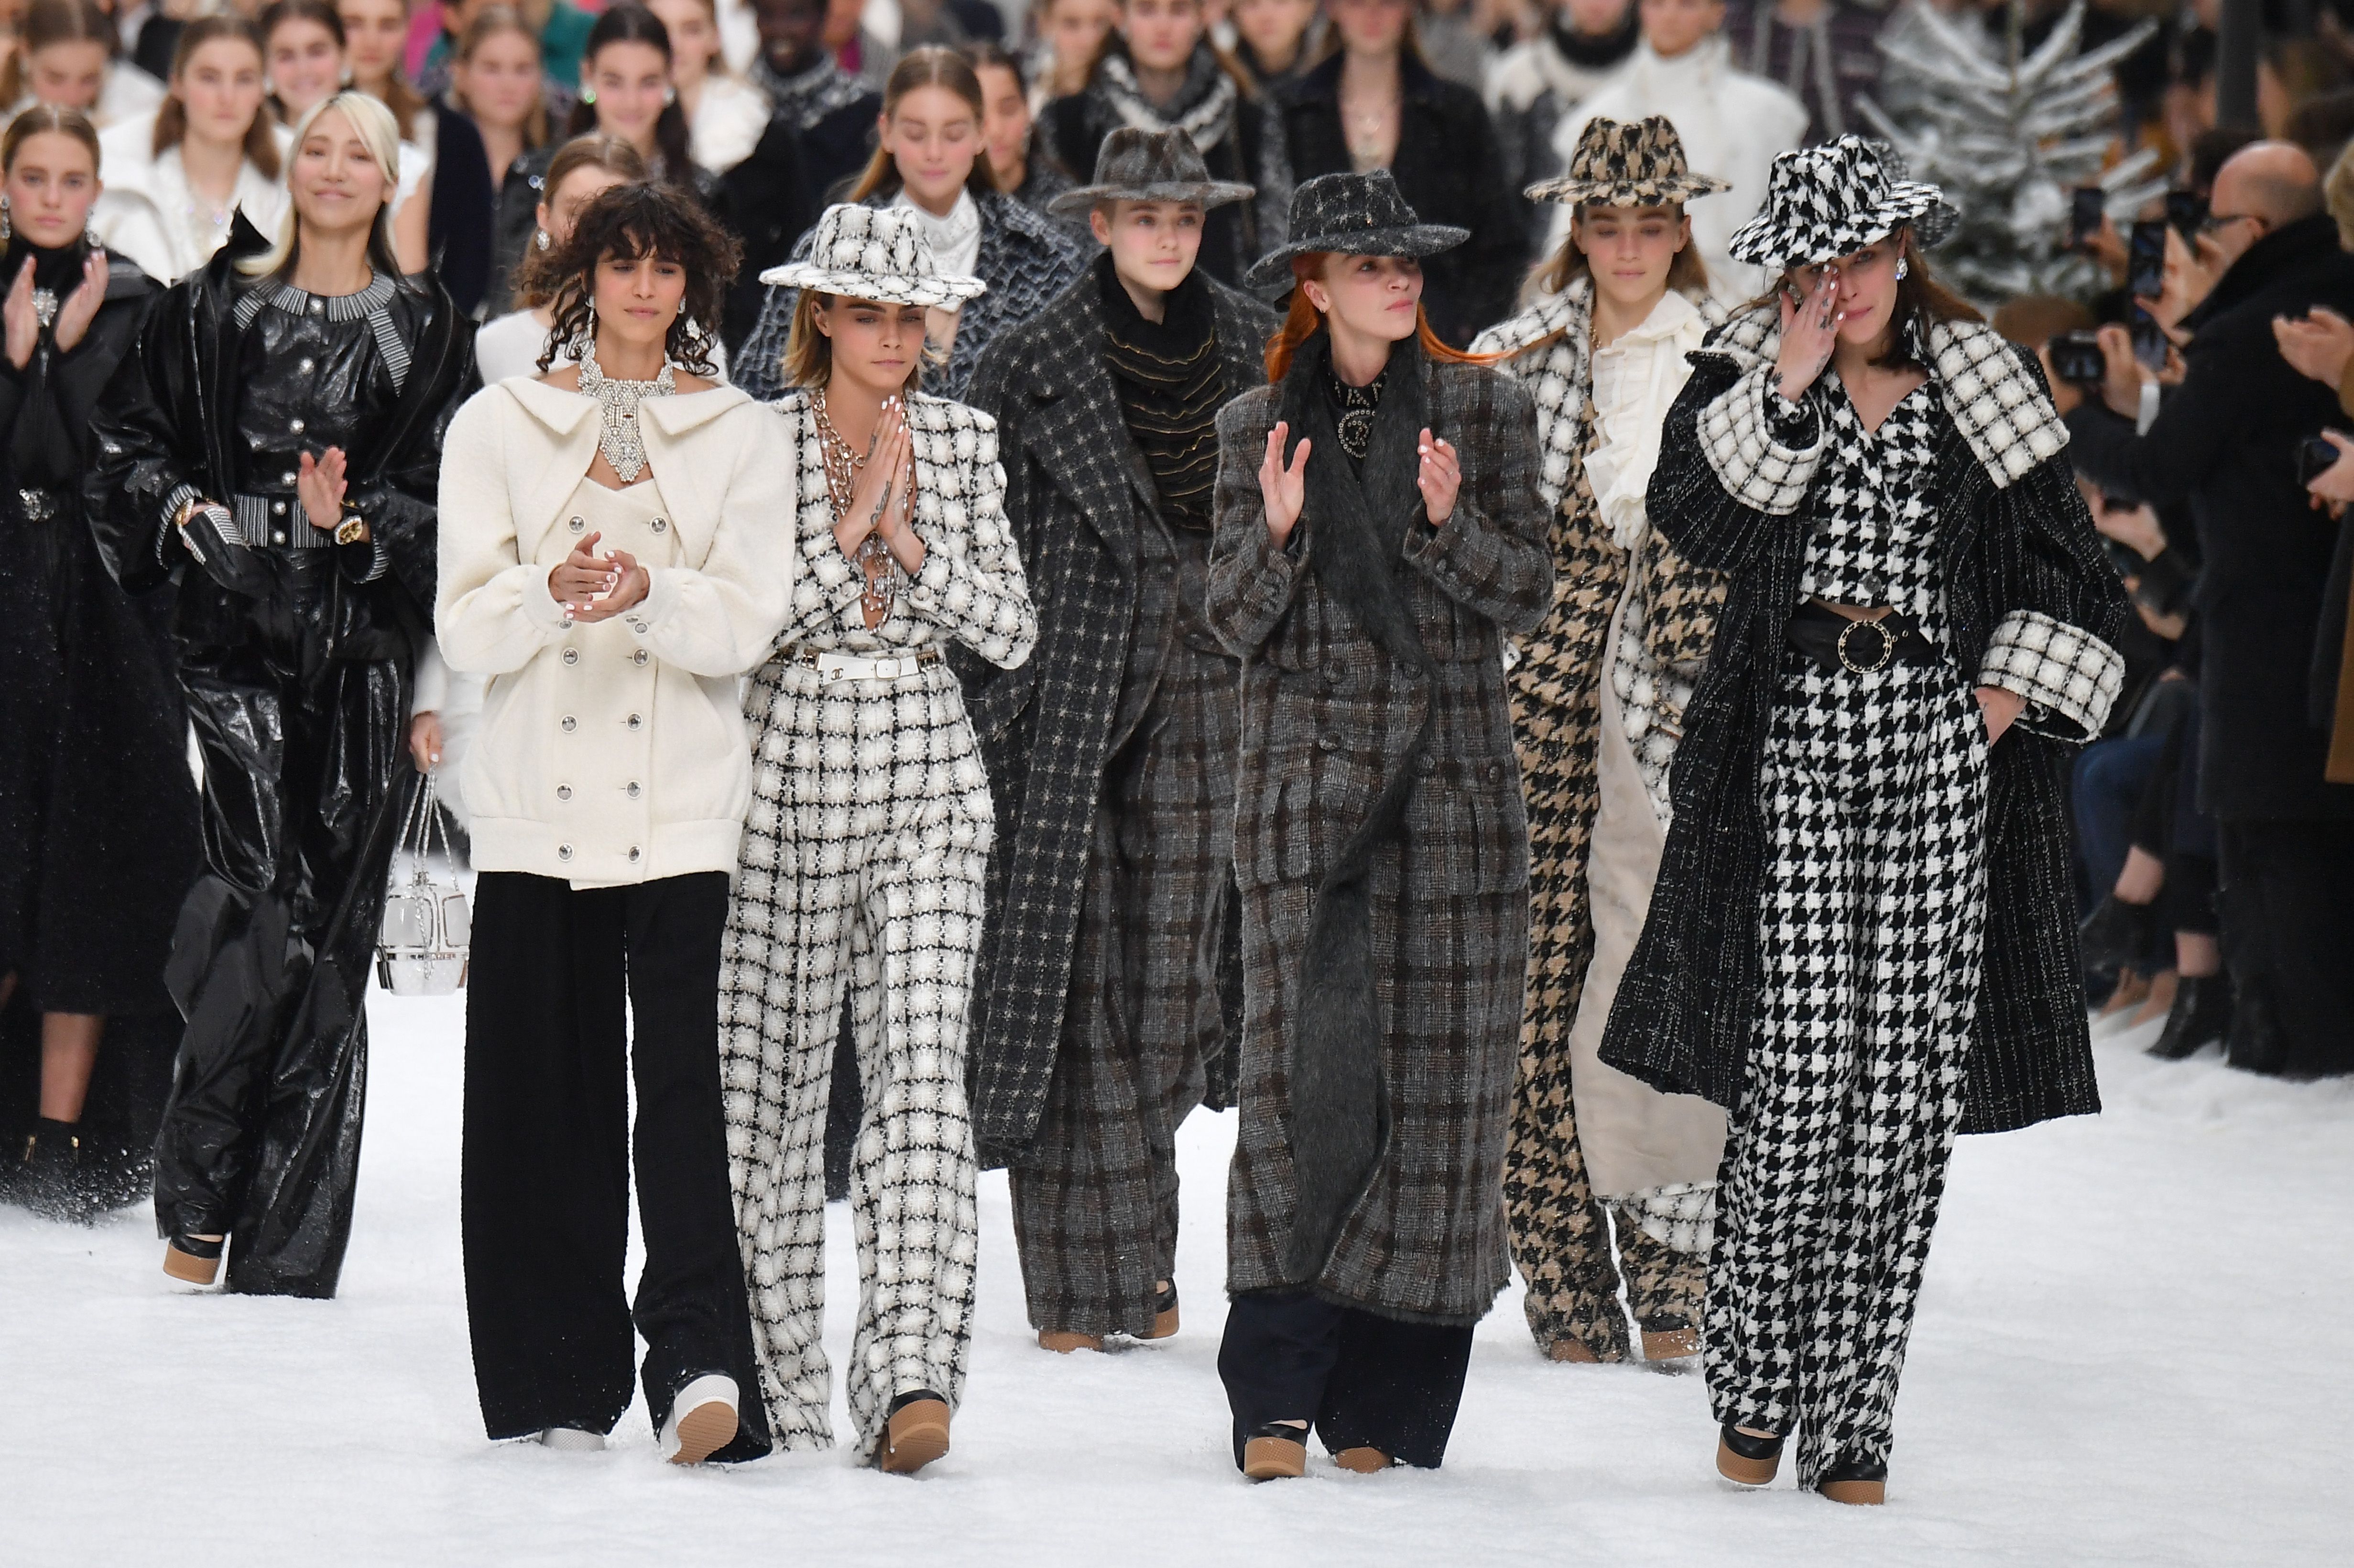 Karl Lagerfelds most impressive fashion shows for Chanel